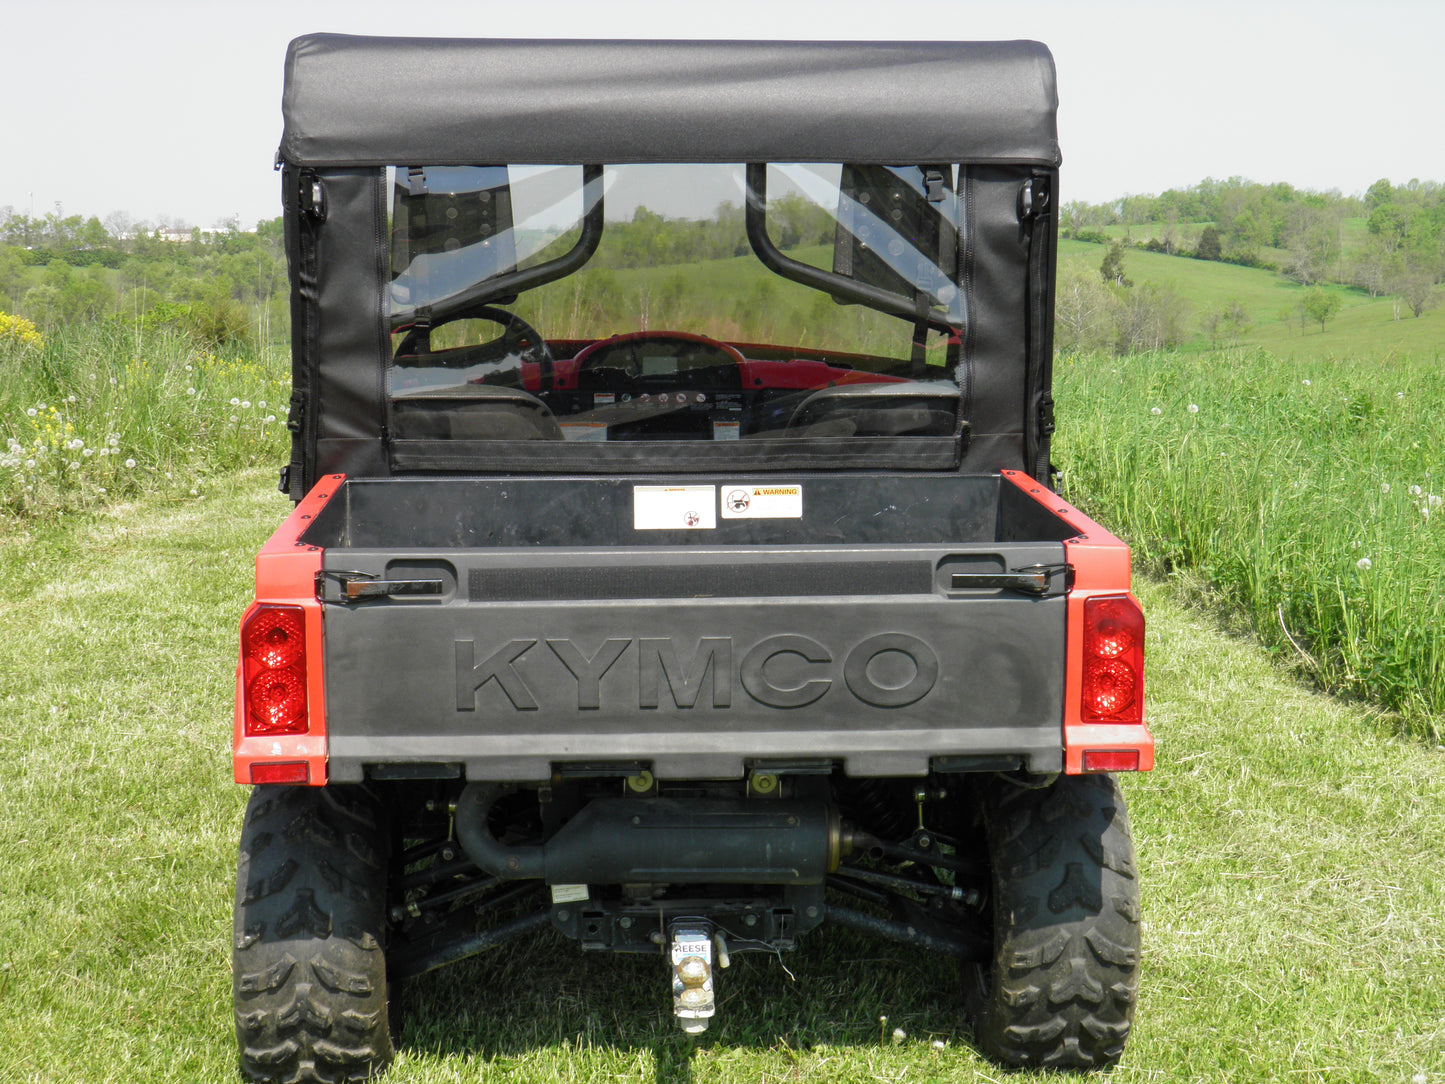 Kymco 500 - Full Cab Enclosure for Hard Windshield